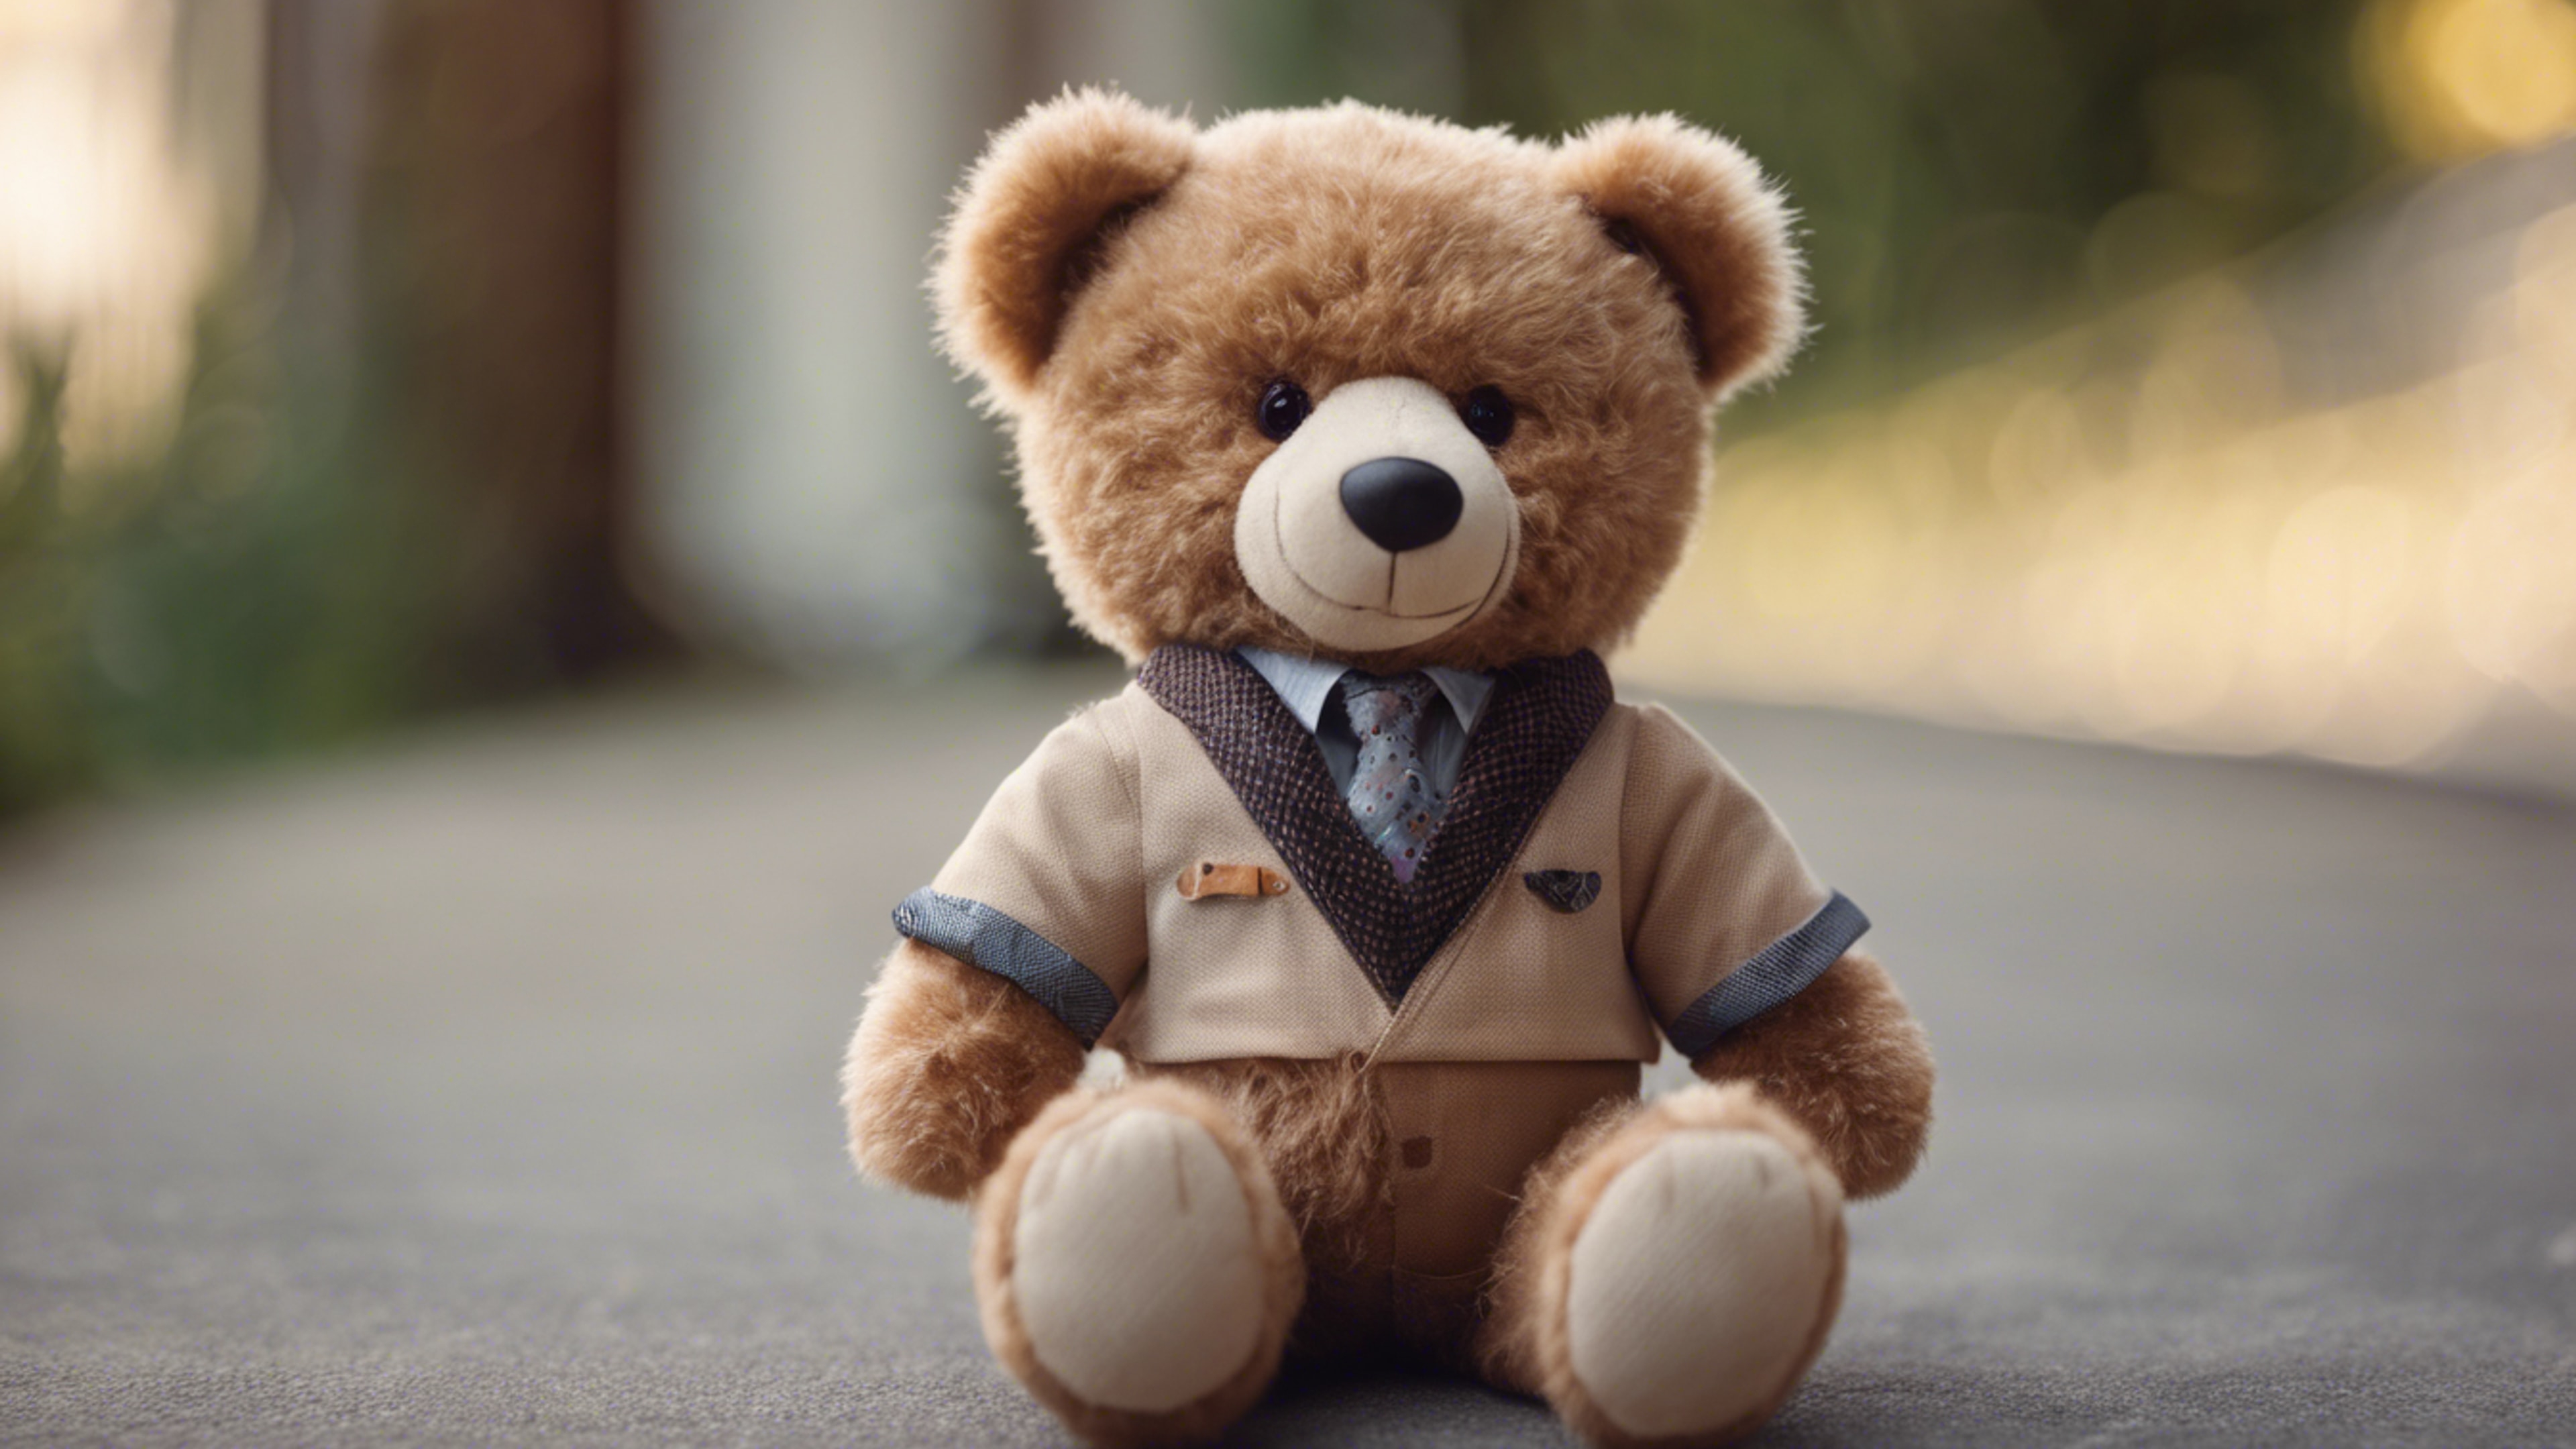 A teddy bear with light brown fur wearing a preppy outfit. Tapet[c4dfc3c378844a52a1e6]